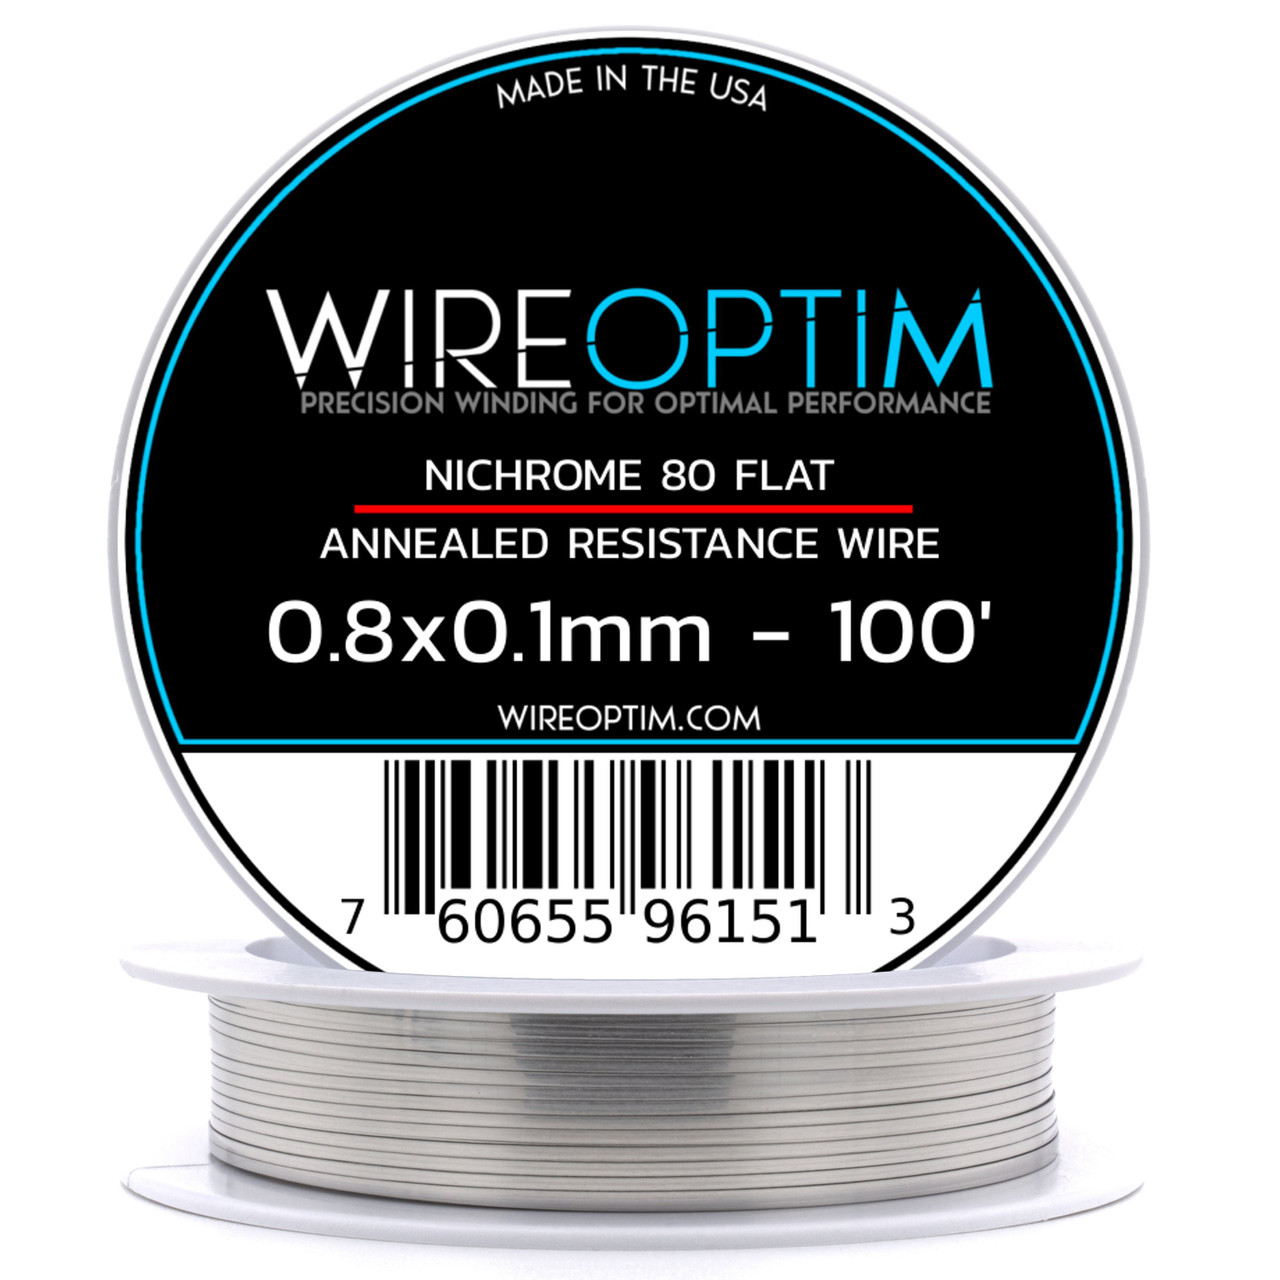 how to get nichrome wire at home